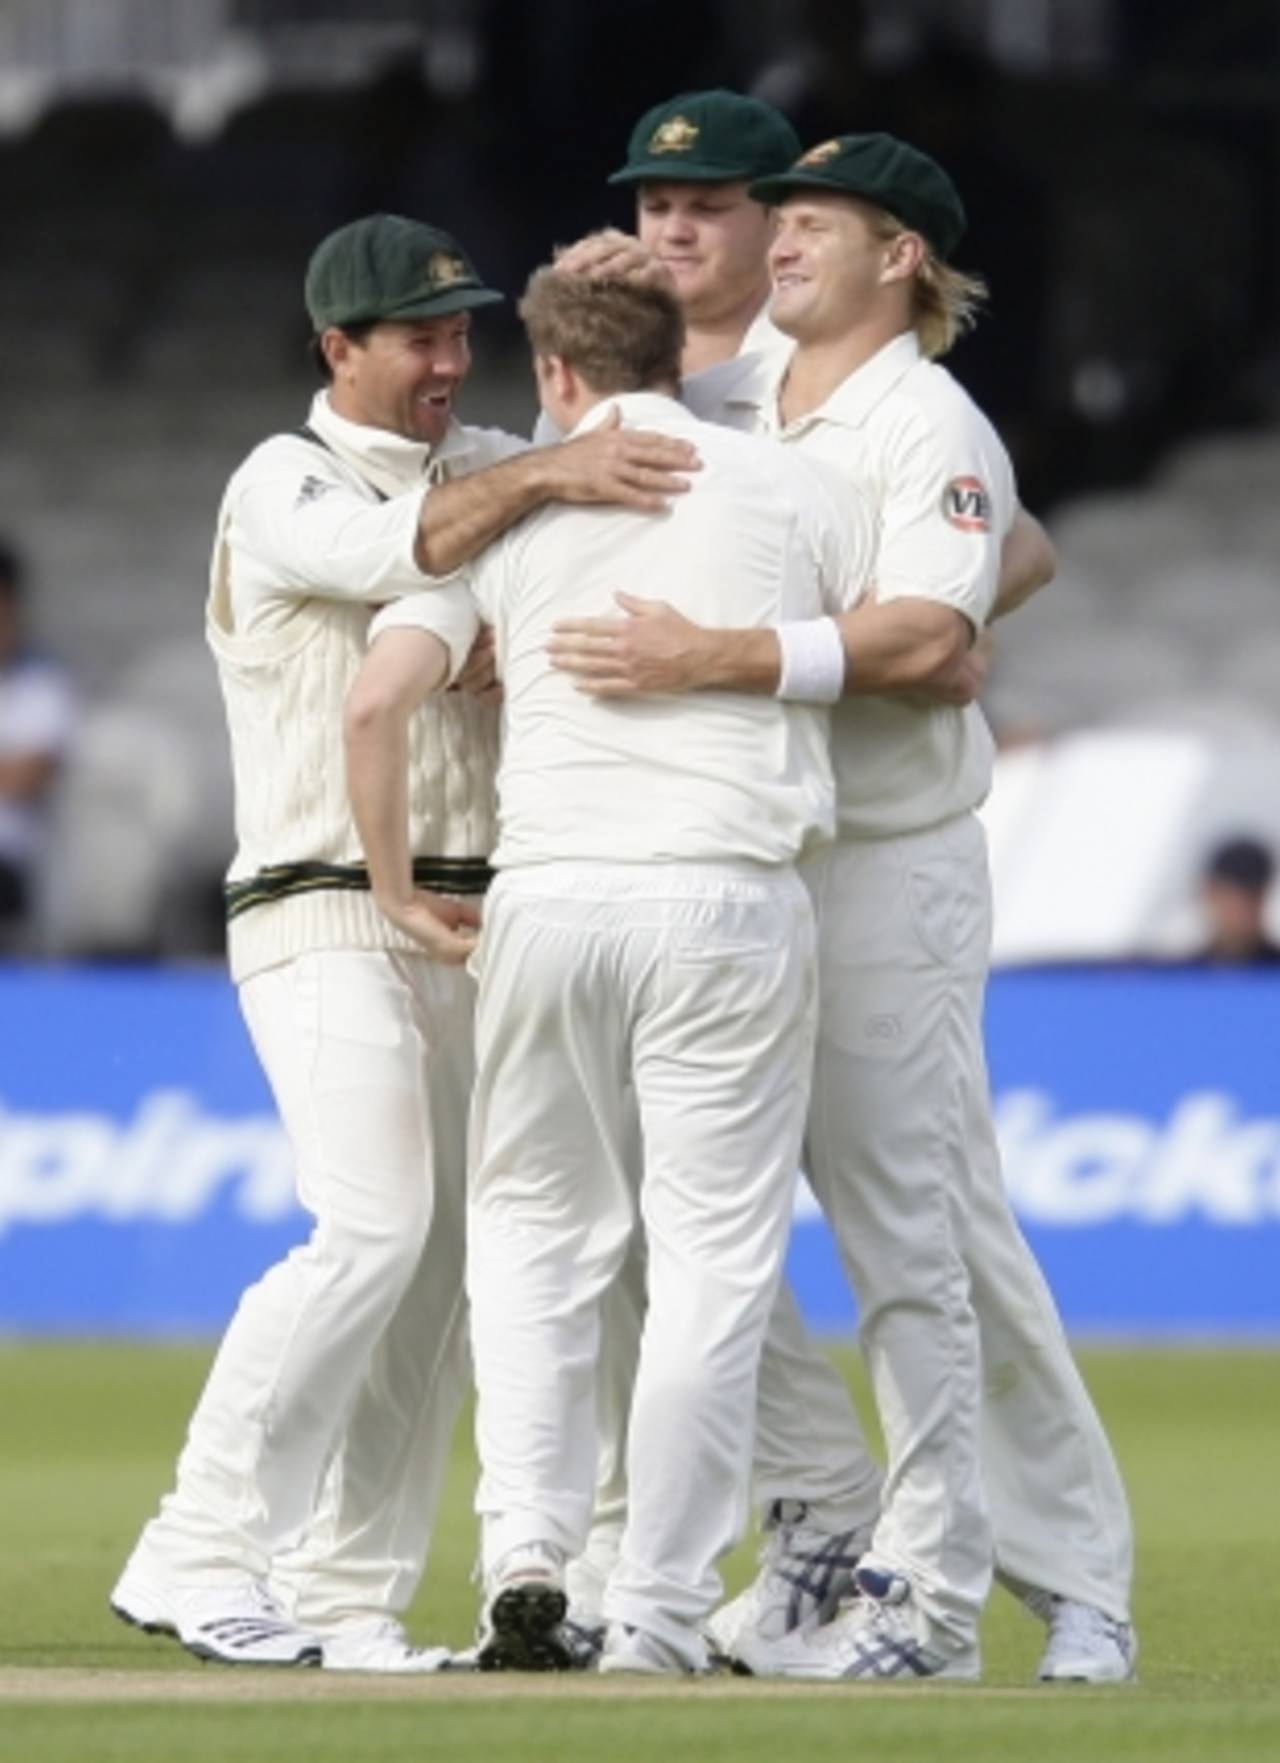 Steven Smith is mobbed by his team-mates after picking up his first wicket in Test cricket, Pakistan v Australia, 1st Test, Lord's, July 15, 2010